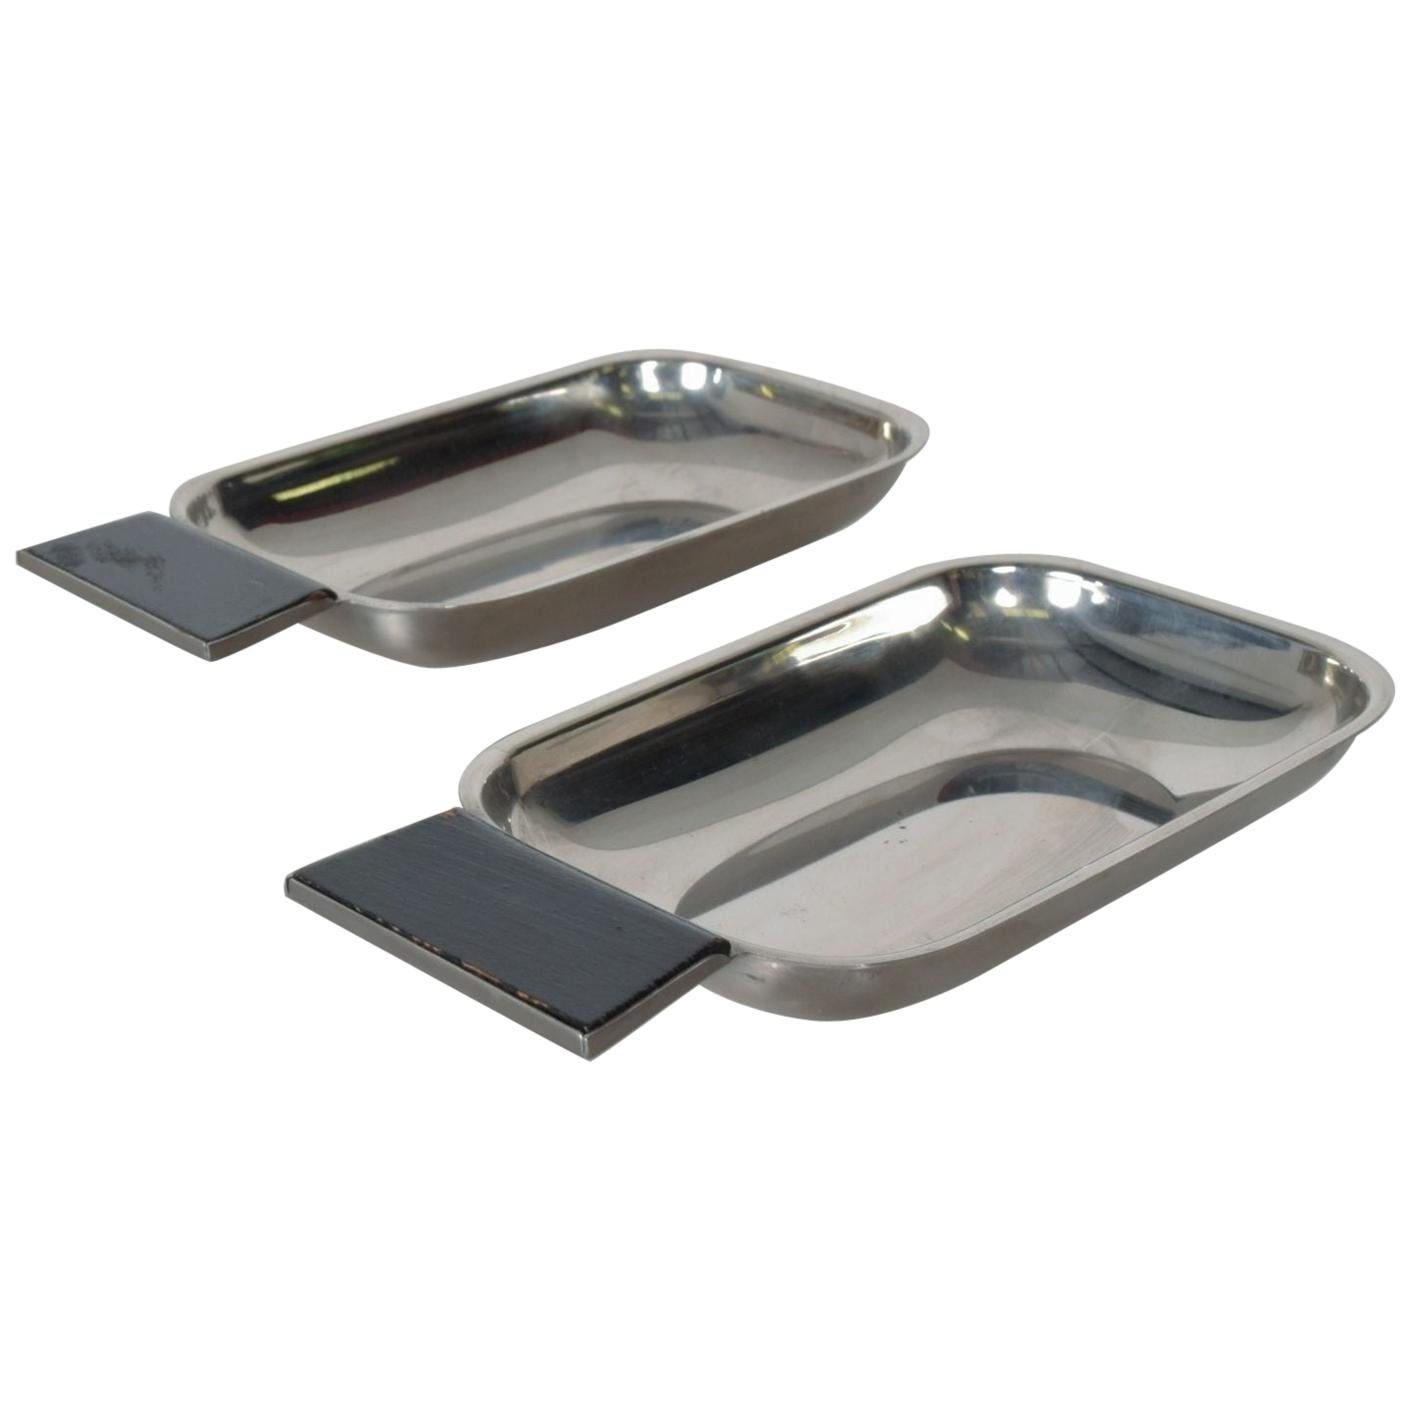 AMBIANIC presents
2 Petite Serving Trays, Handled Dish Side Trays from Italy in Stainless Steel. Sold as a set.
Easy carry handle.
Marked on underside. Made in Italy.
Vintage Mid Century Modern Italian product.
3.5W x .75H x 6.75D
Original preowned